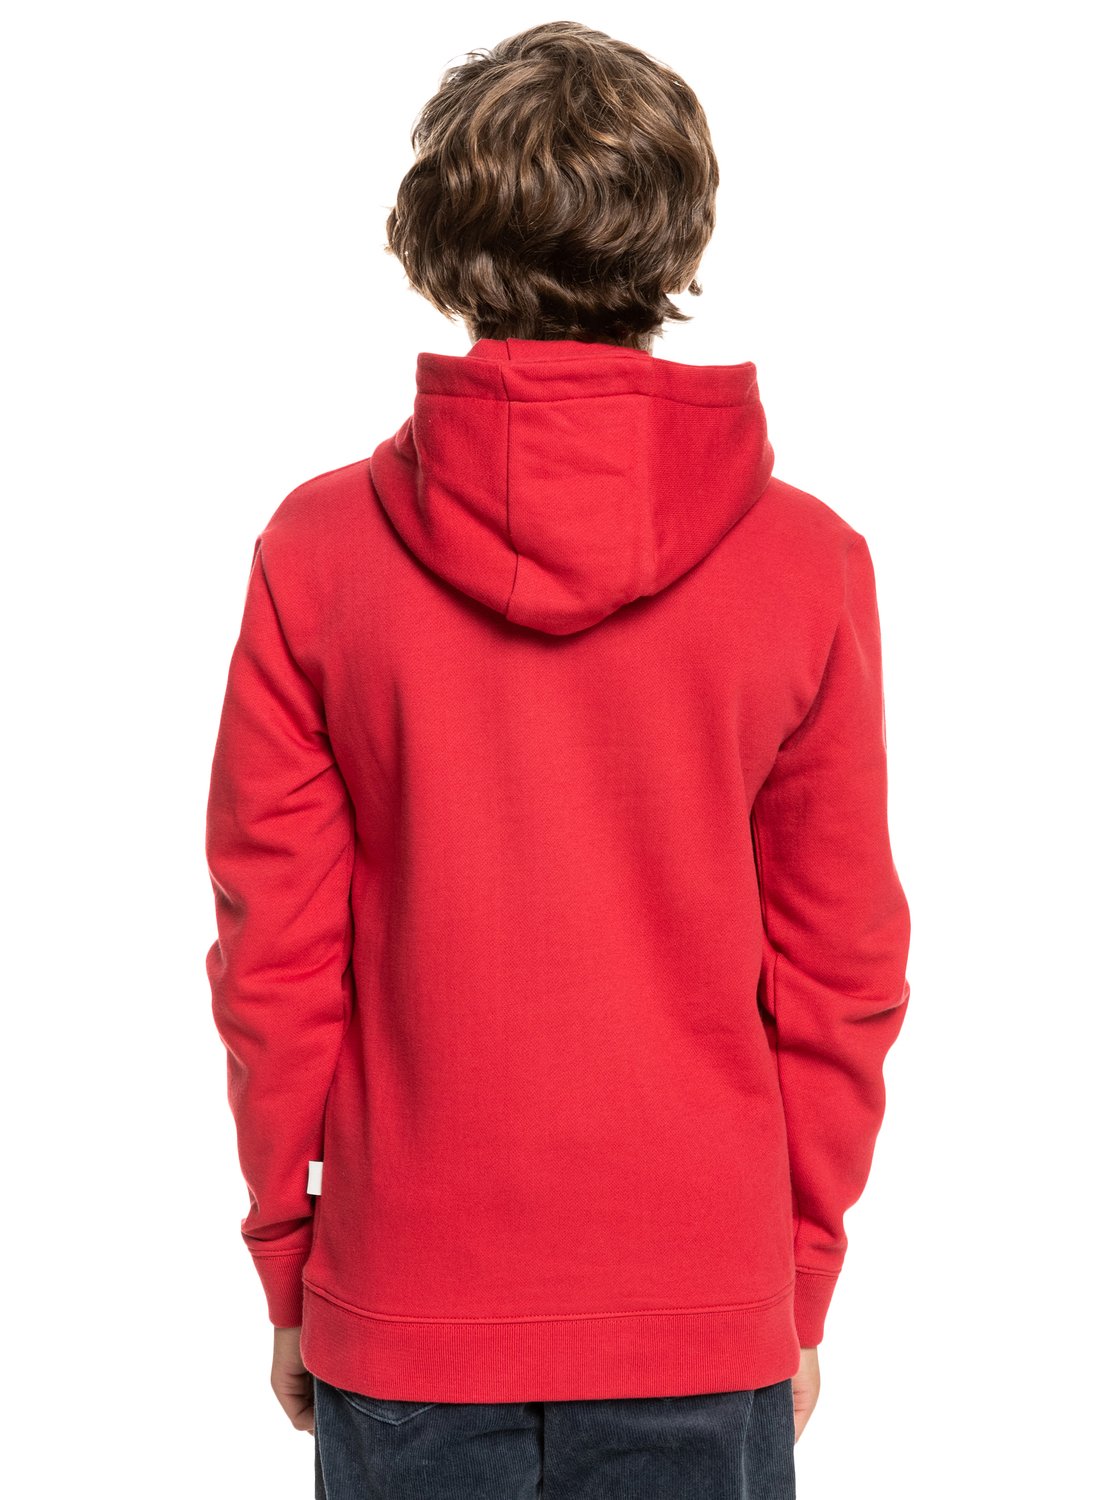 Quiksilver Boys Primary Colours Hoodie in American Red